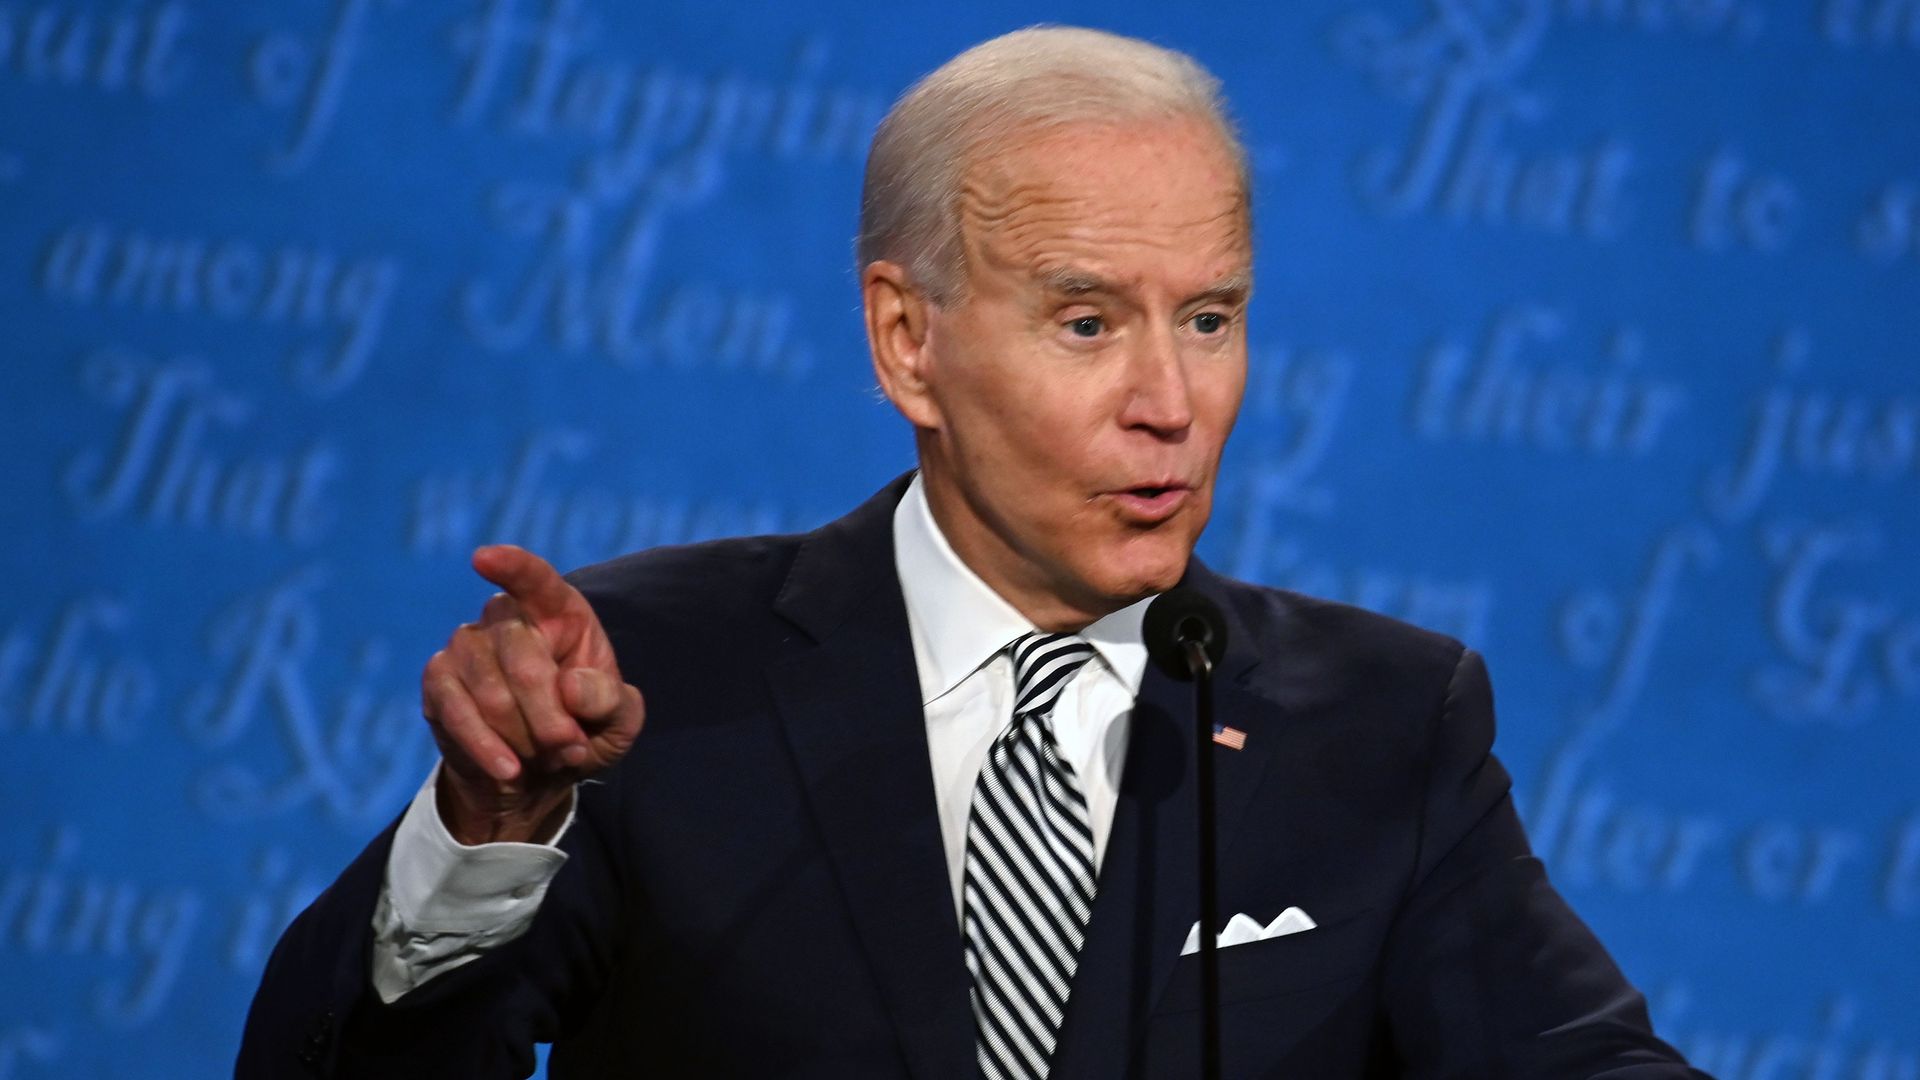  Democratic Presidential candidate  Joe Biden speaks during the first presidential debate at the Case Western Reserve University and Cleveland Clinic in Cleveland, Ohio on September 29